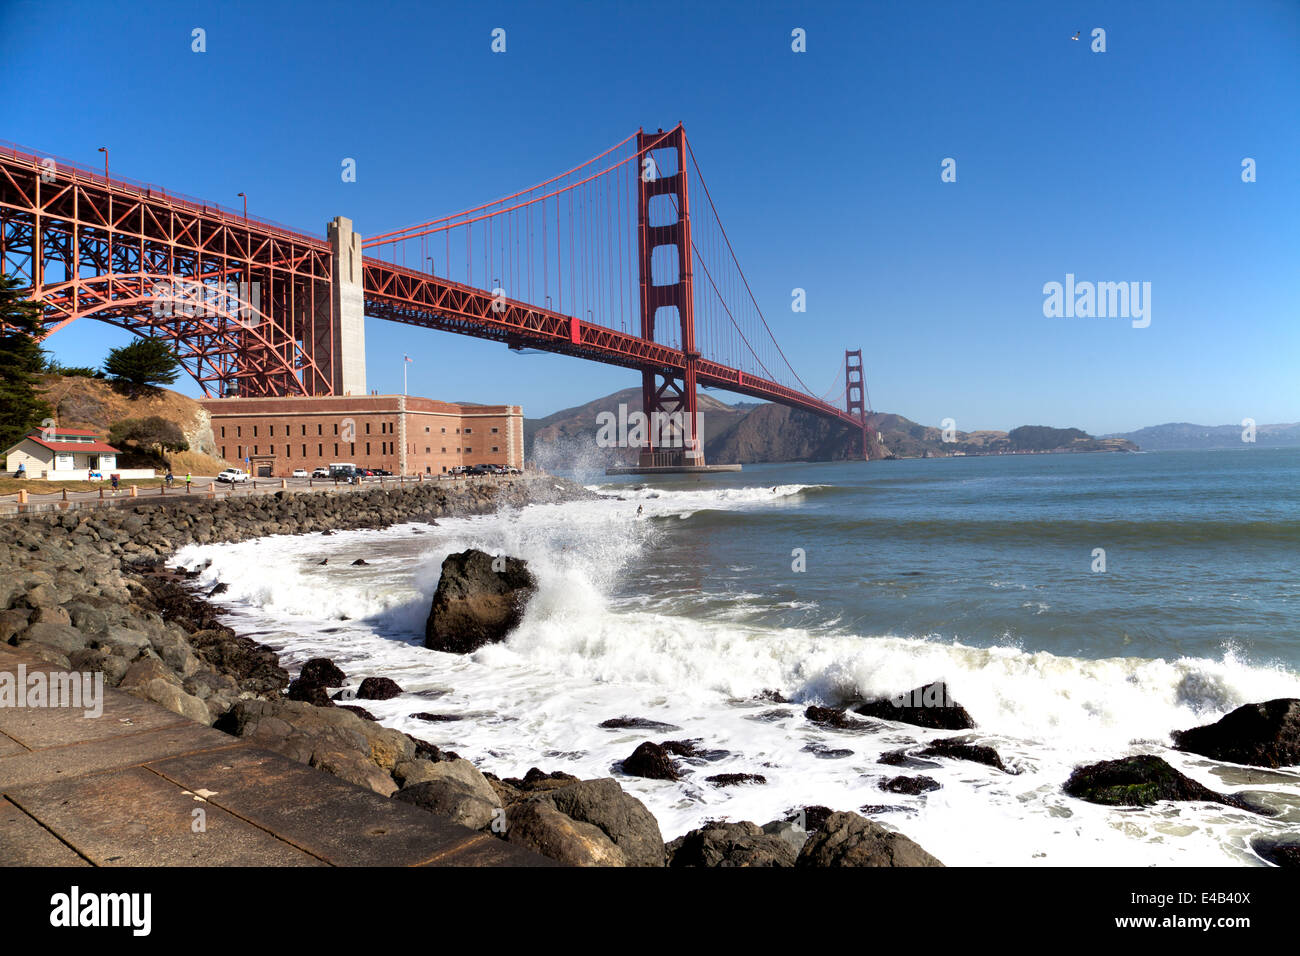 Fort point at the foot of the Golden Gate Bridge, San Francisco, California, USA Stock Photo